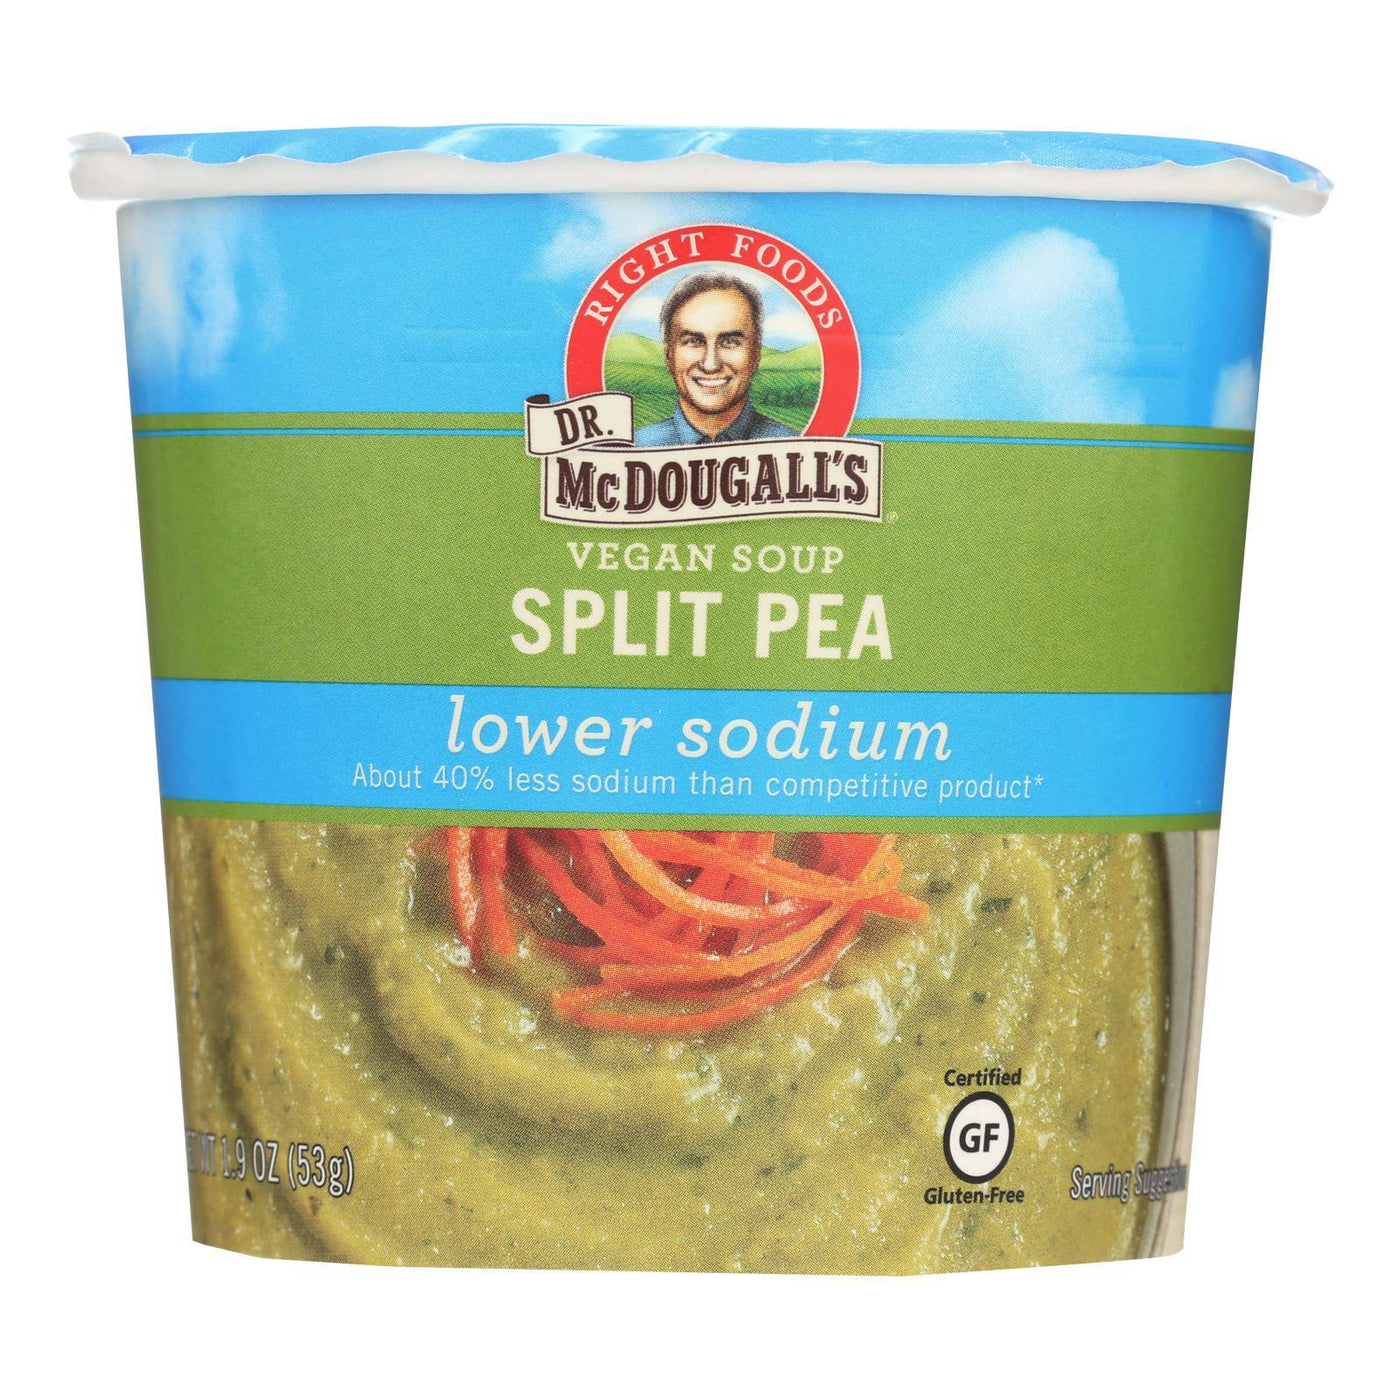 Buy Dr. Mcdougall's Vegan Split Pea Lower Sodium Soup Cup - Case Of 6 - 1.9 Oz.  at OnlyNaturals.us